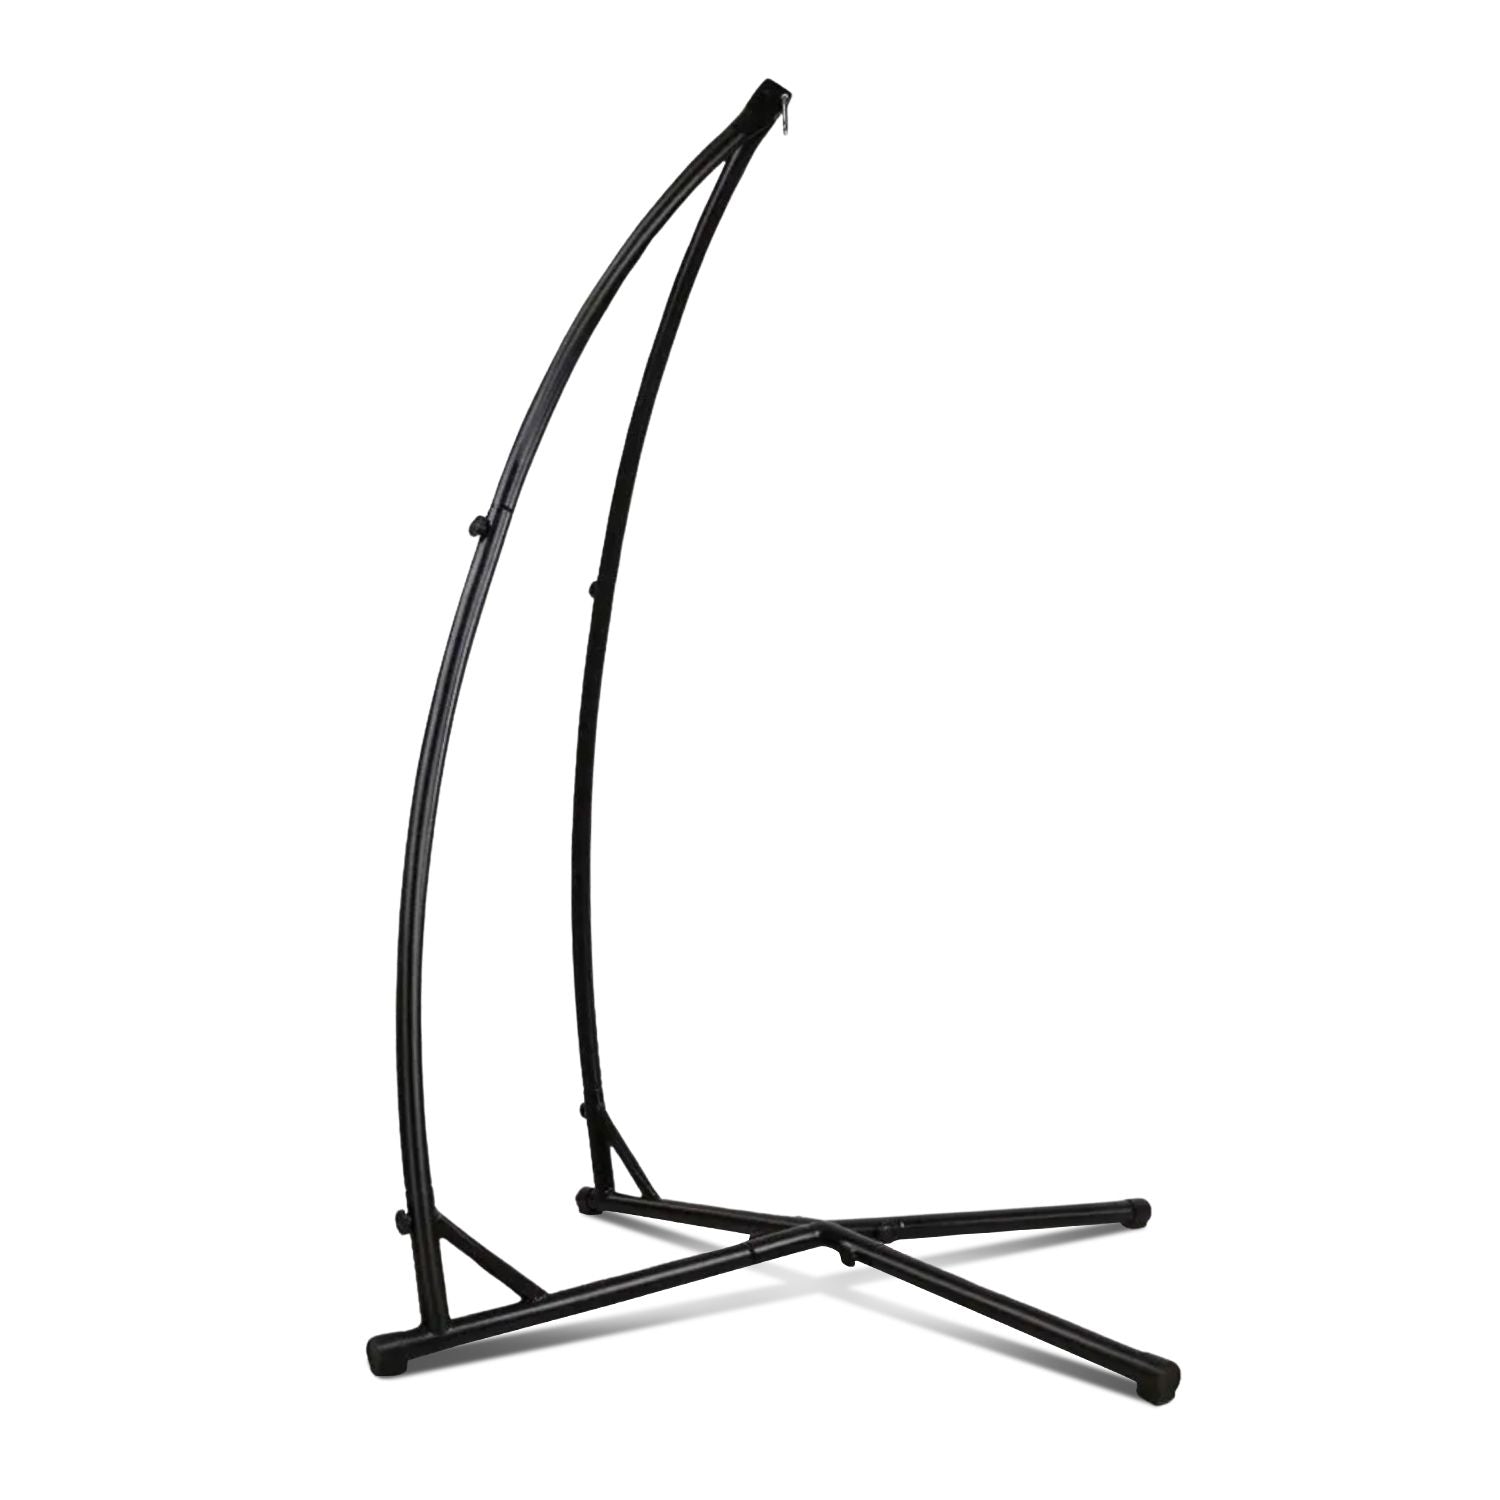 NOVEDEN Hammock Chair Stand for Hanging Air Porch Swing Chair (Black)